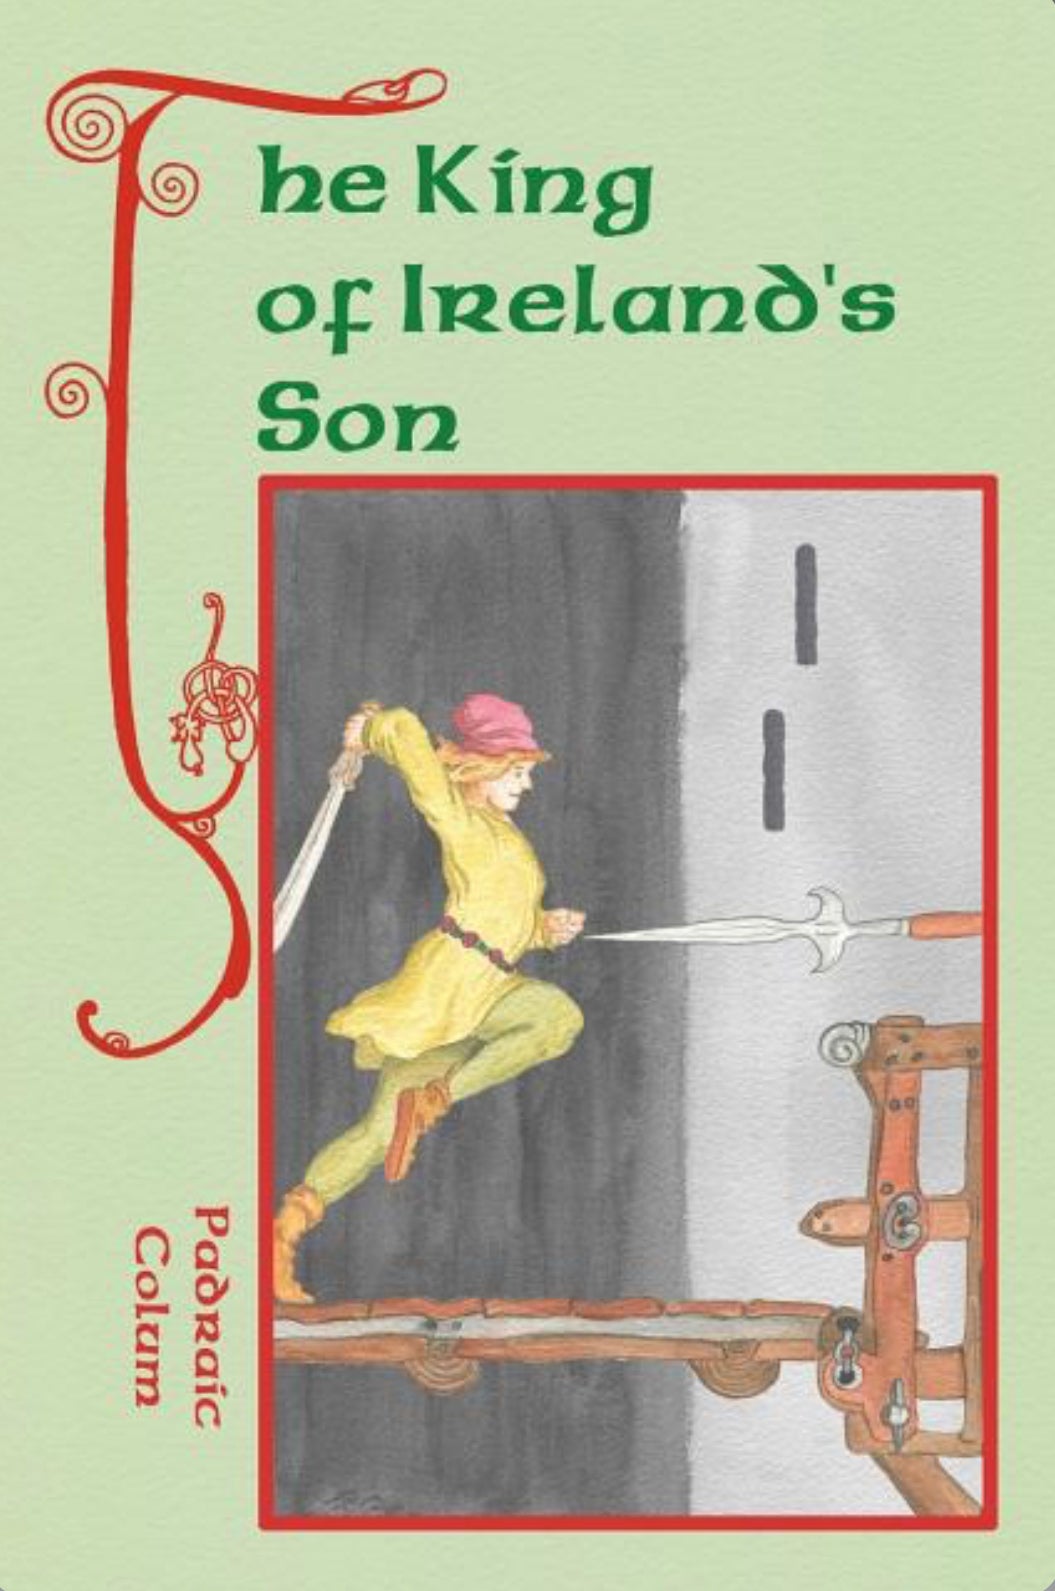 The King of Ireland’s Son | Bedtime Stories for Kids by Padraic Colum - Alder & Alouette